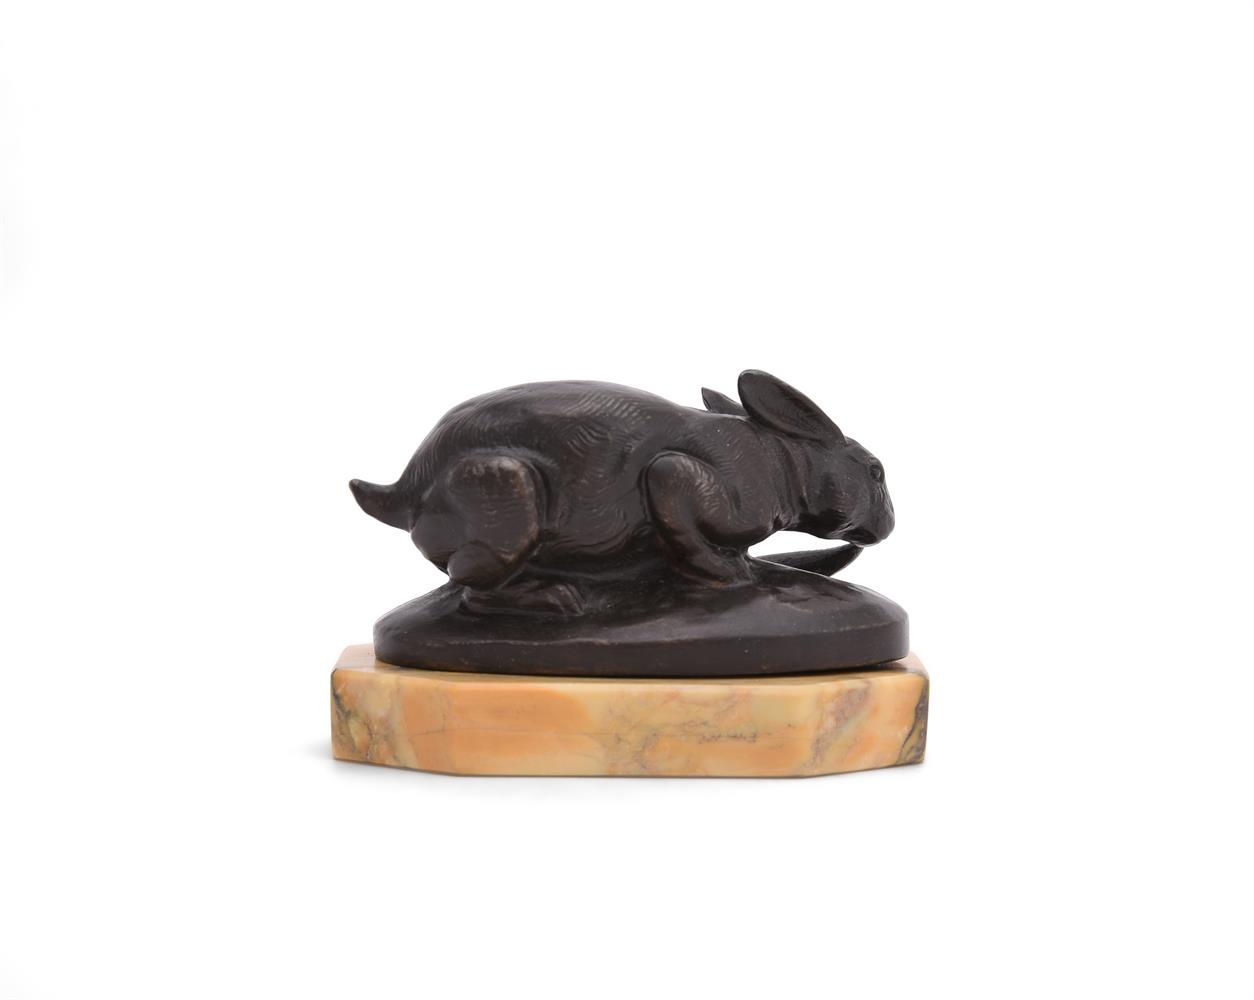 MAURICE FRECOURT (FRENCH, LATE 19TH/EARLY 20TH CENTURY), A SPELTER MODEL OF TWO RABBITS - Image 5 of 8